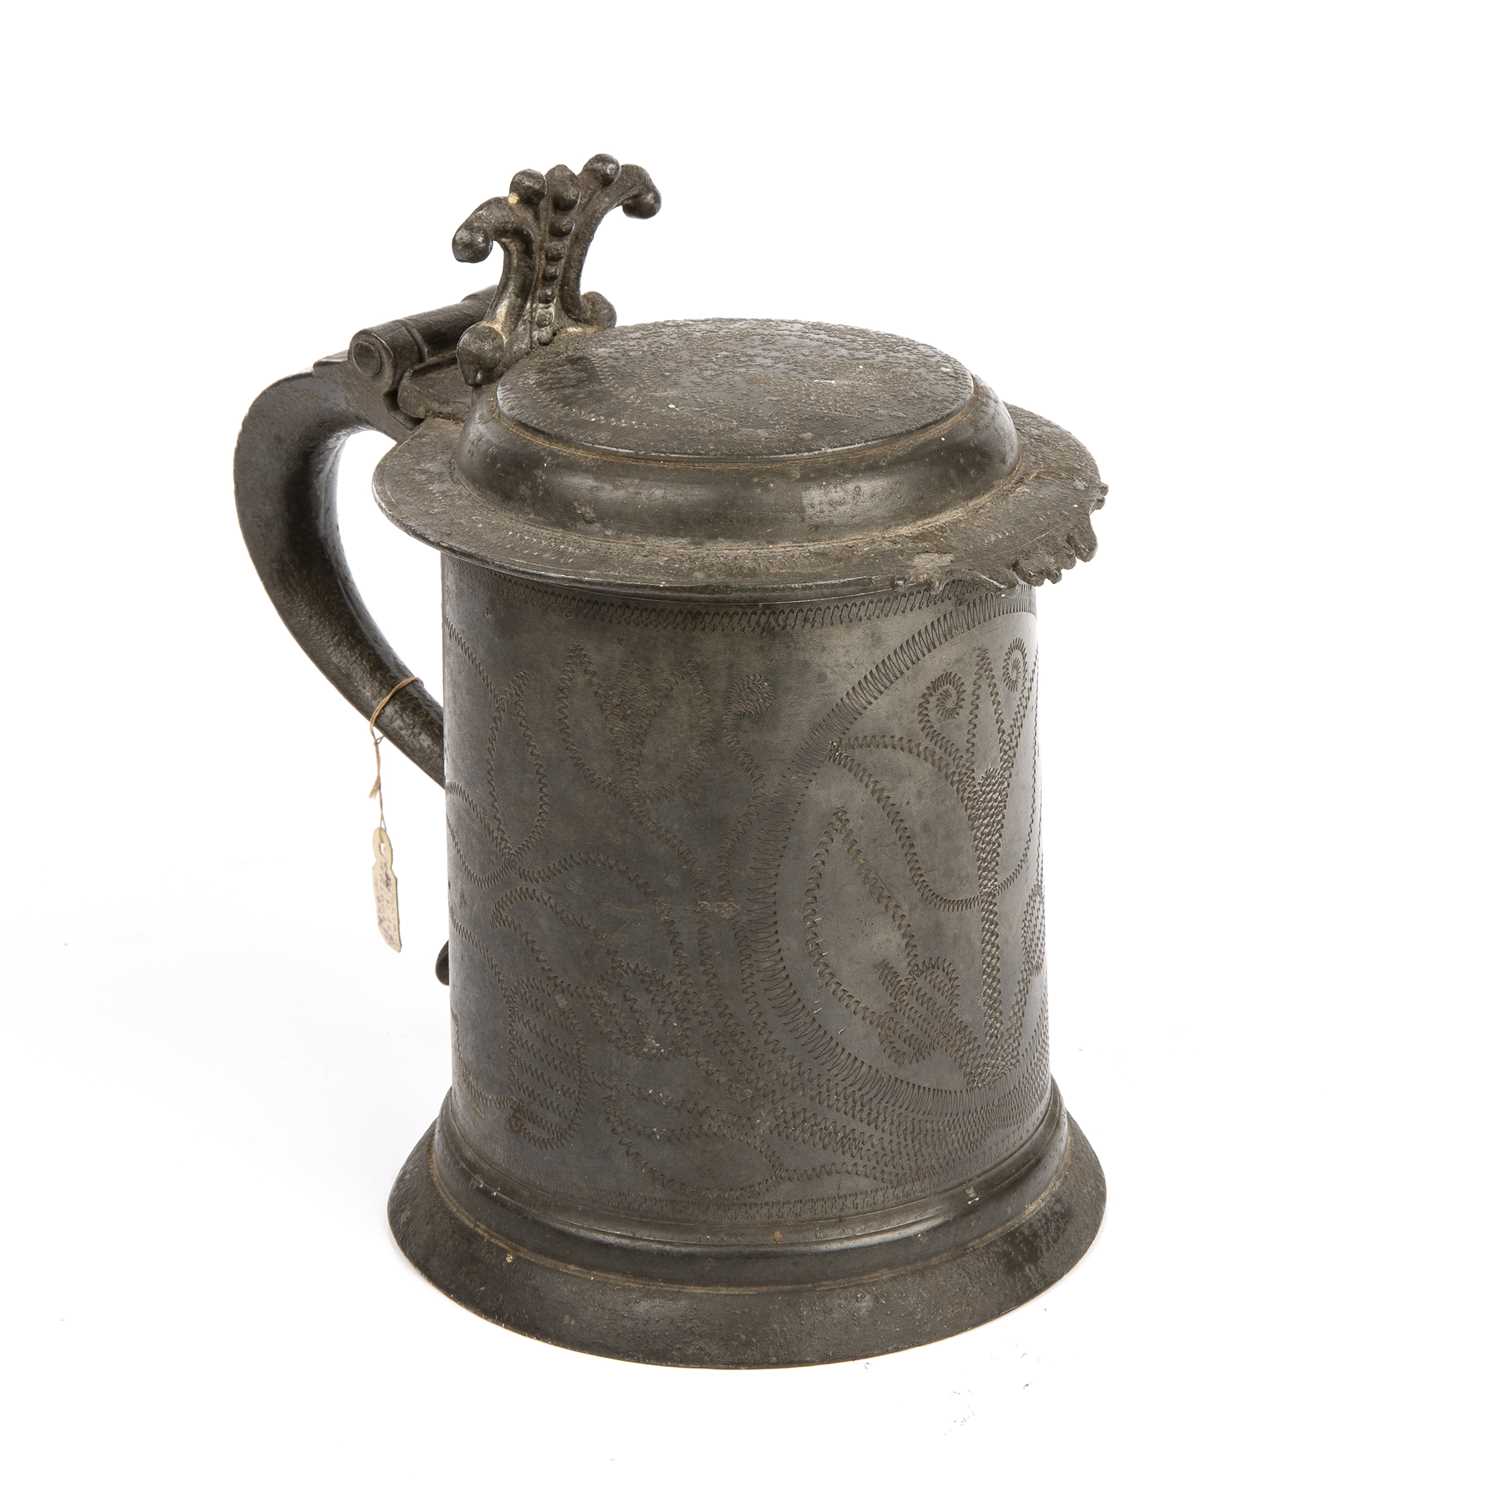 A 17th century wriggle work pewter flat lidded tankard by Lawrence Anderton of Wigan circa 1660-1690